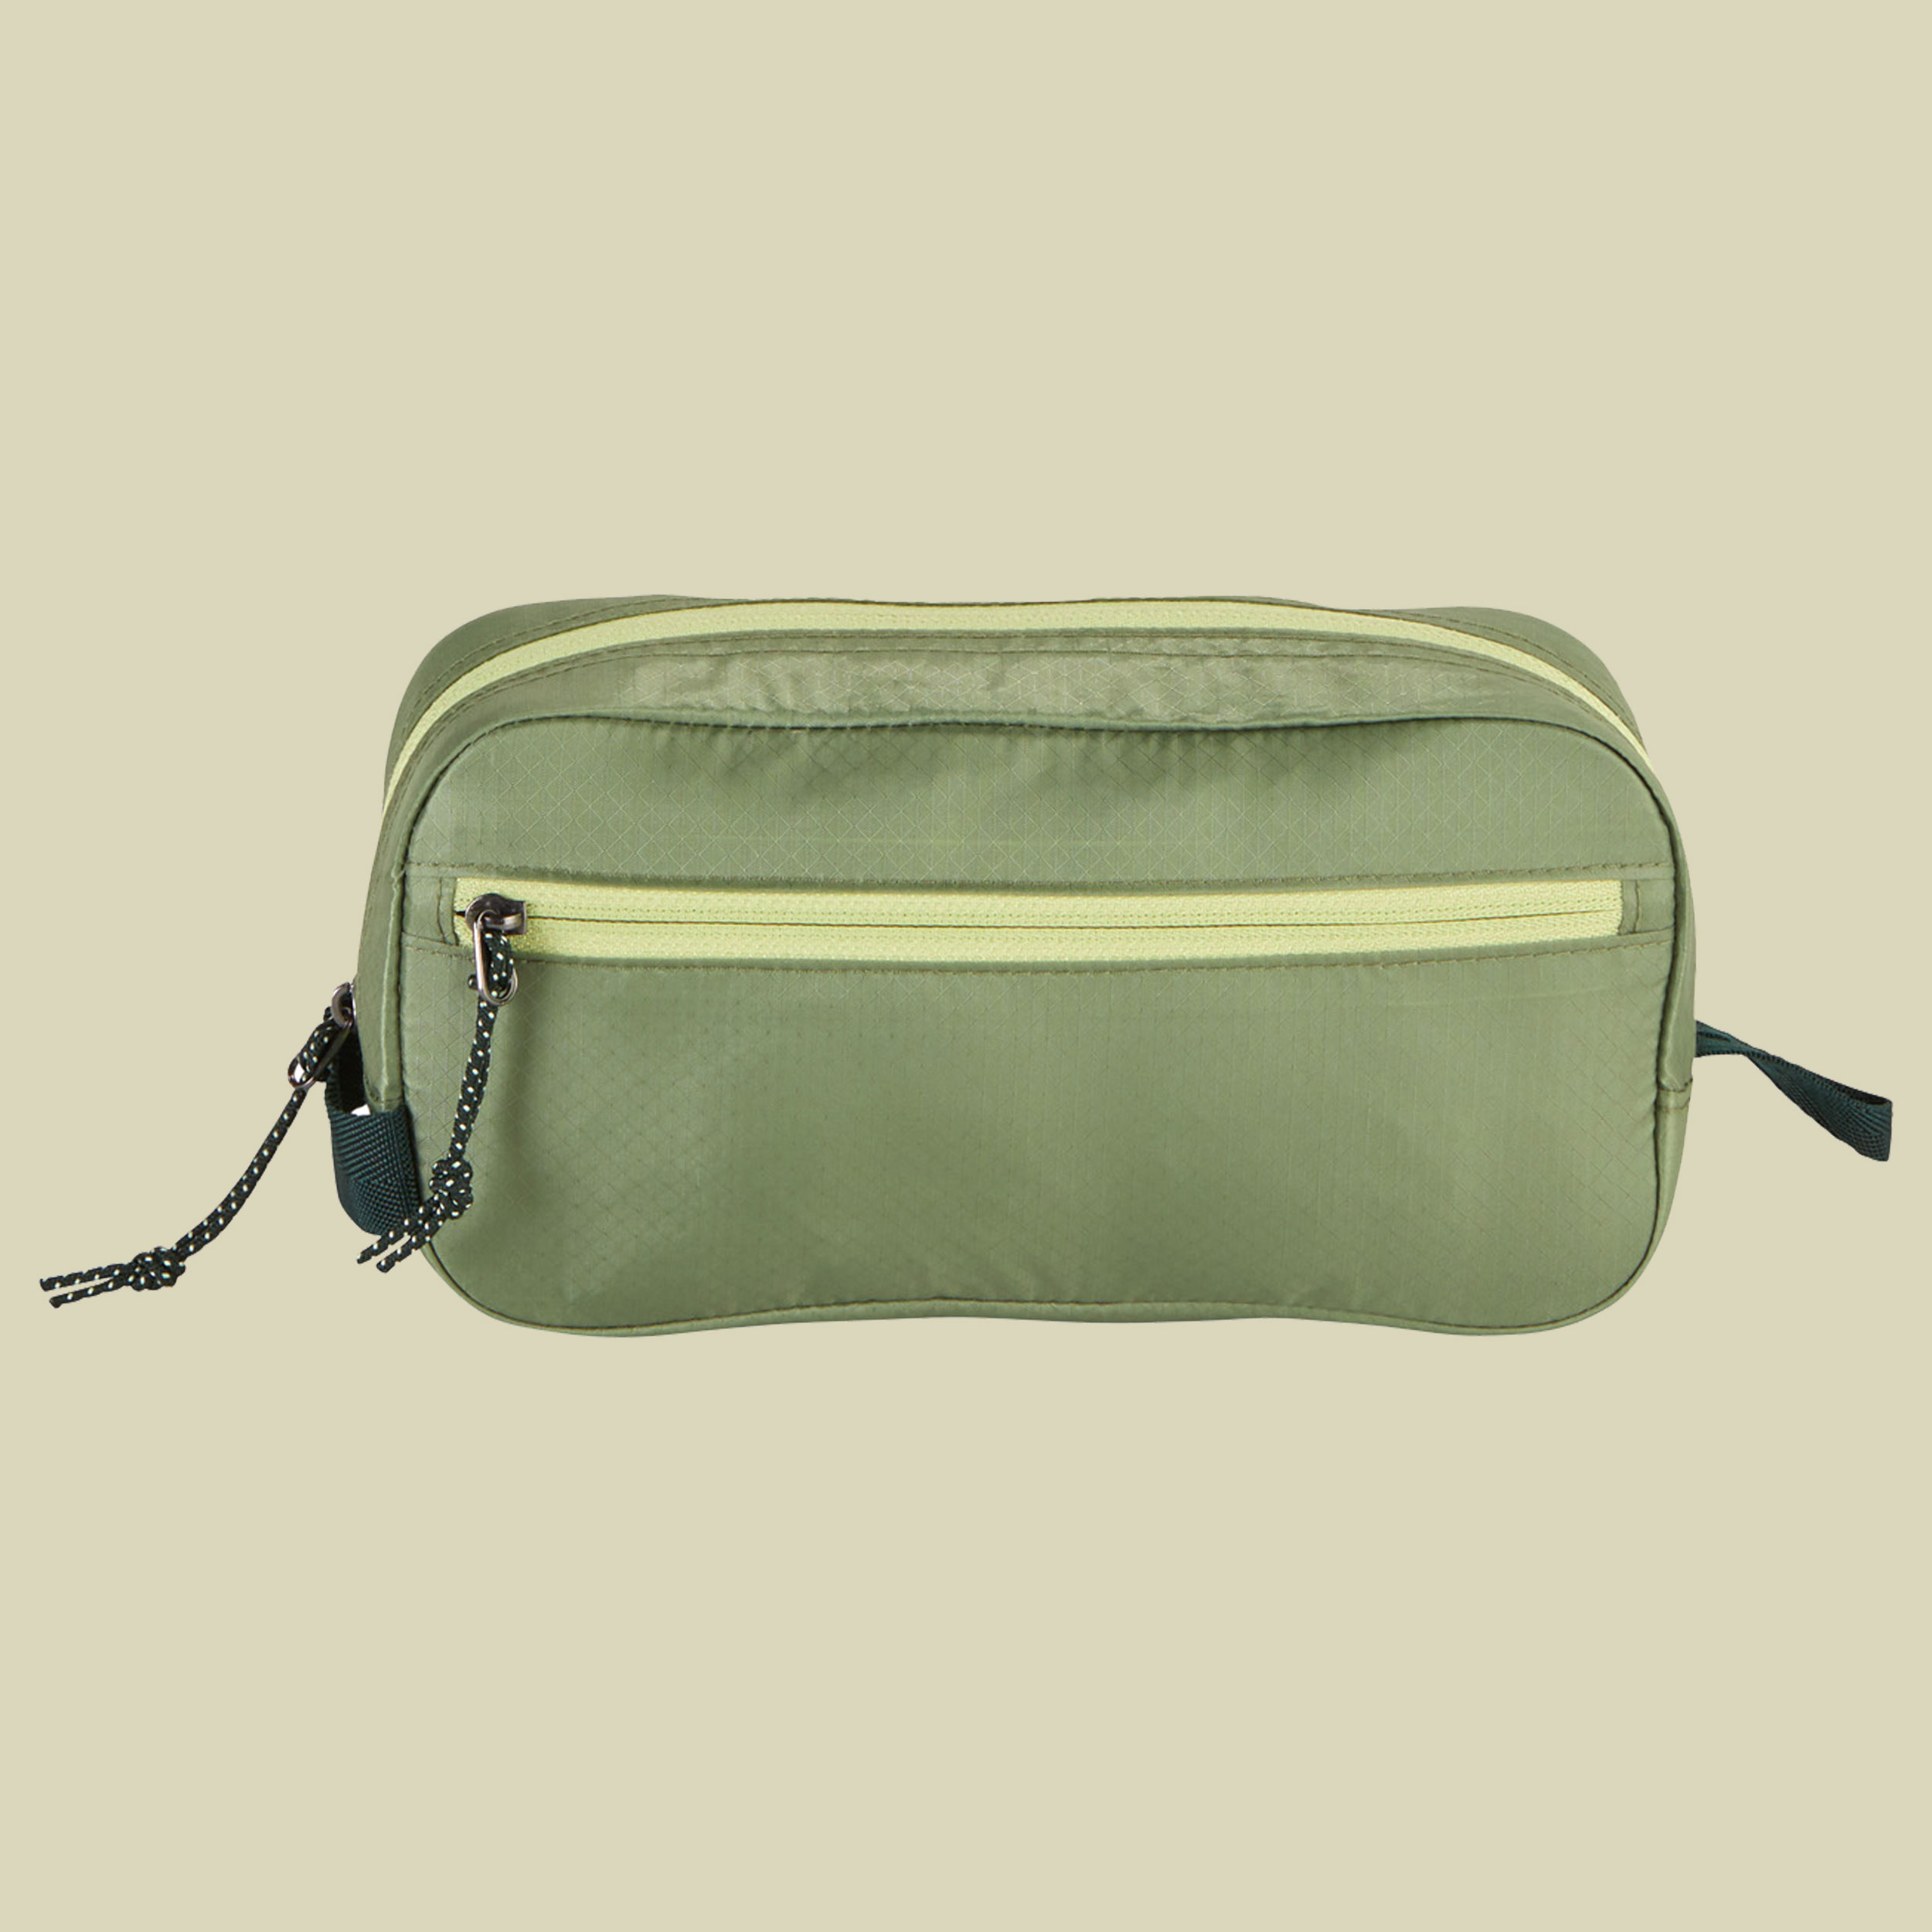 Pack-It Isolate Quick Trip Größe XS Farbe mossy green